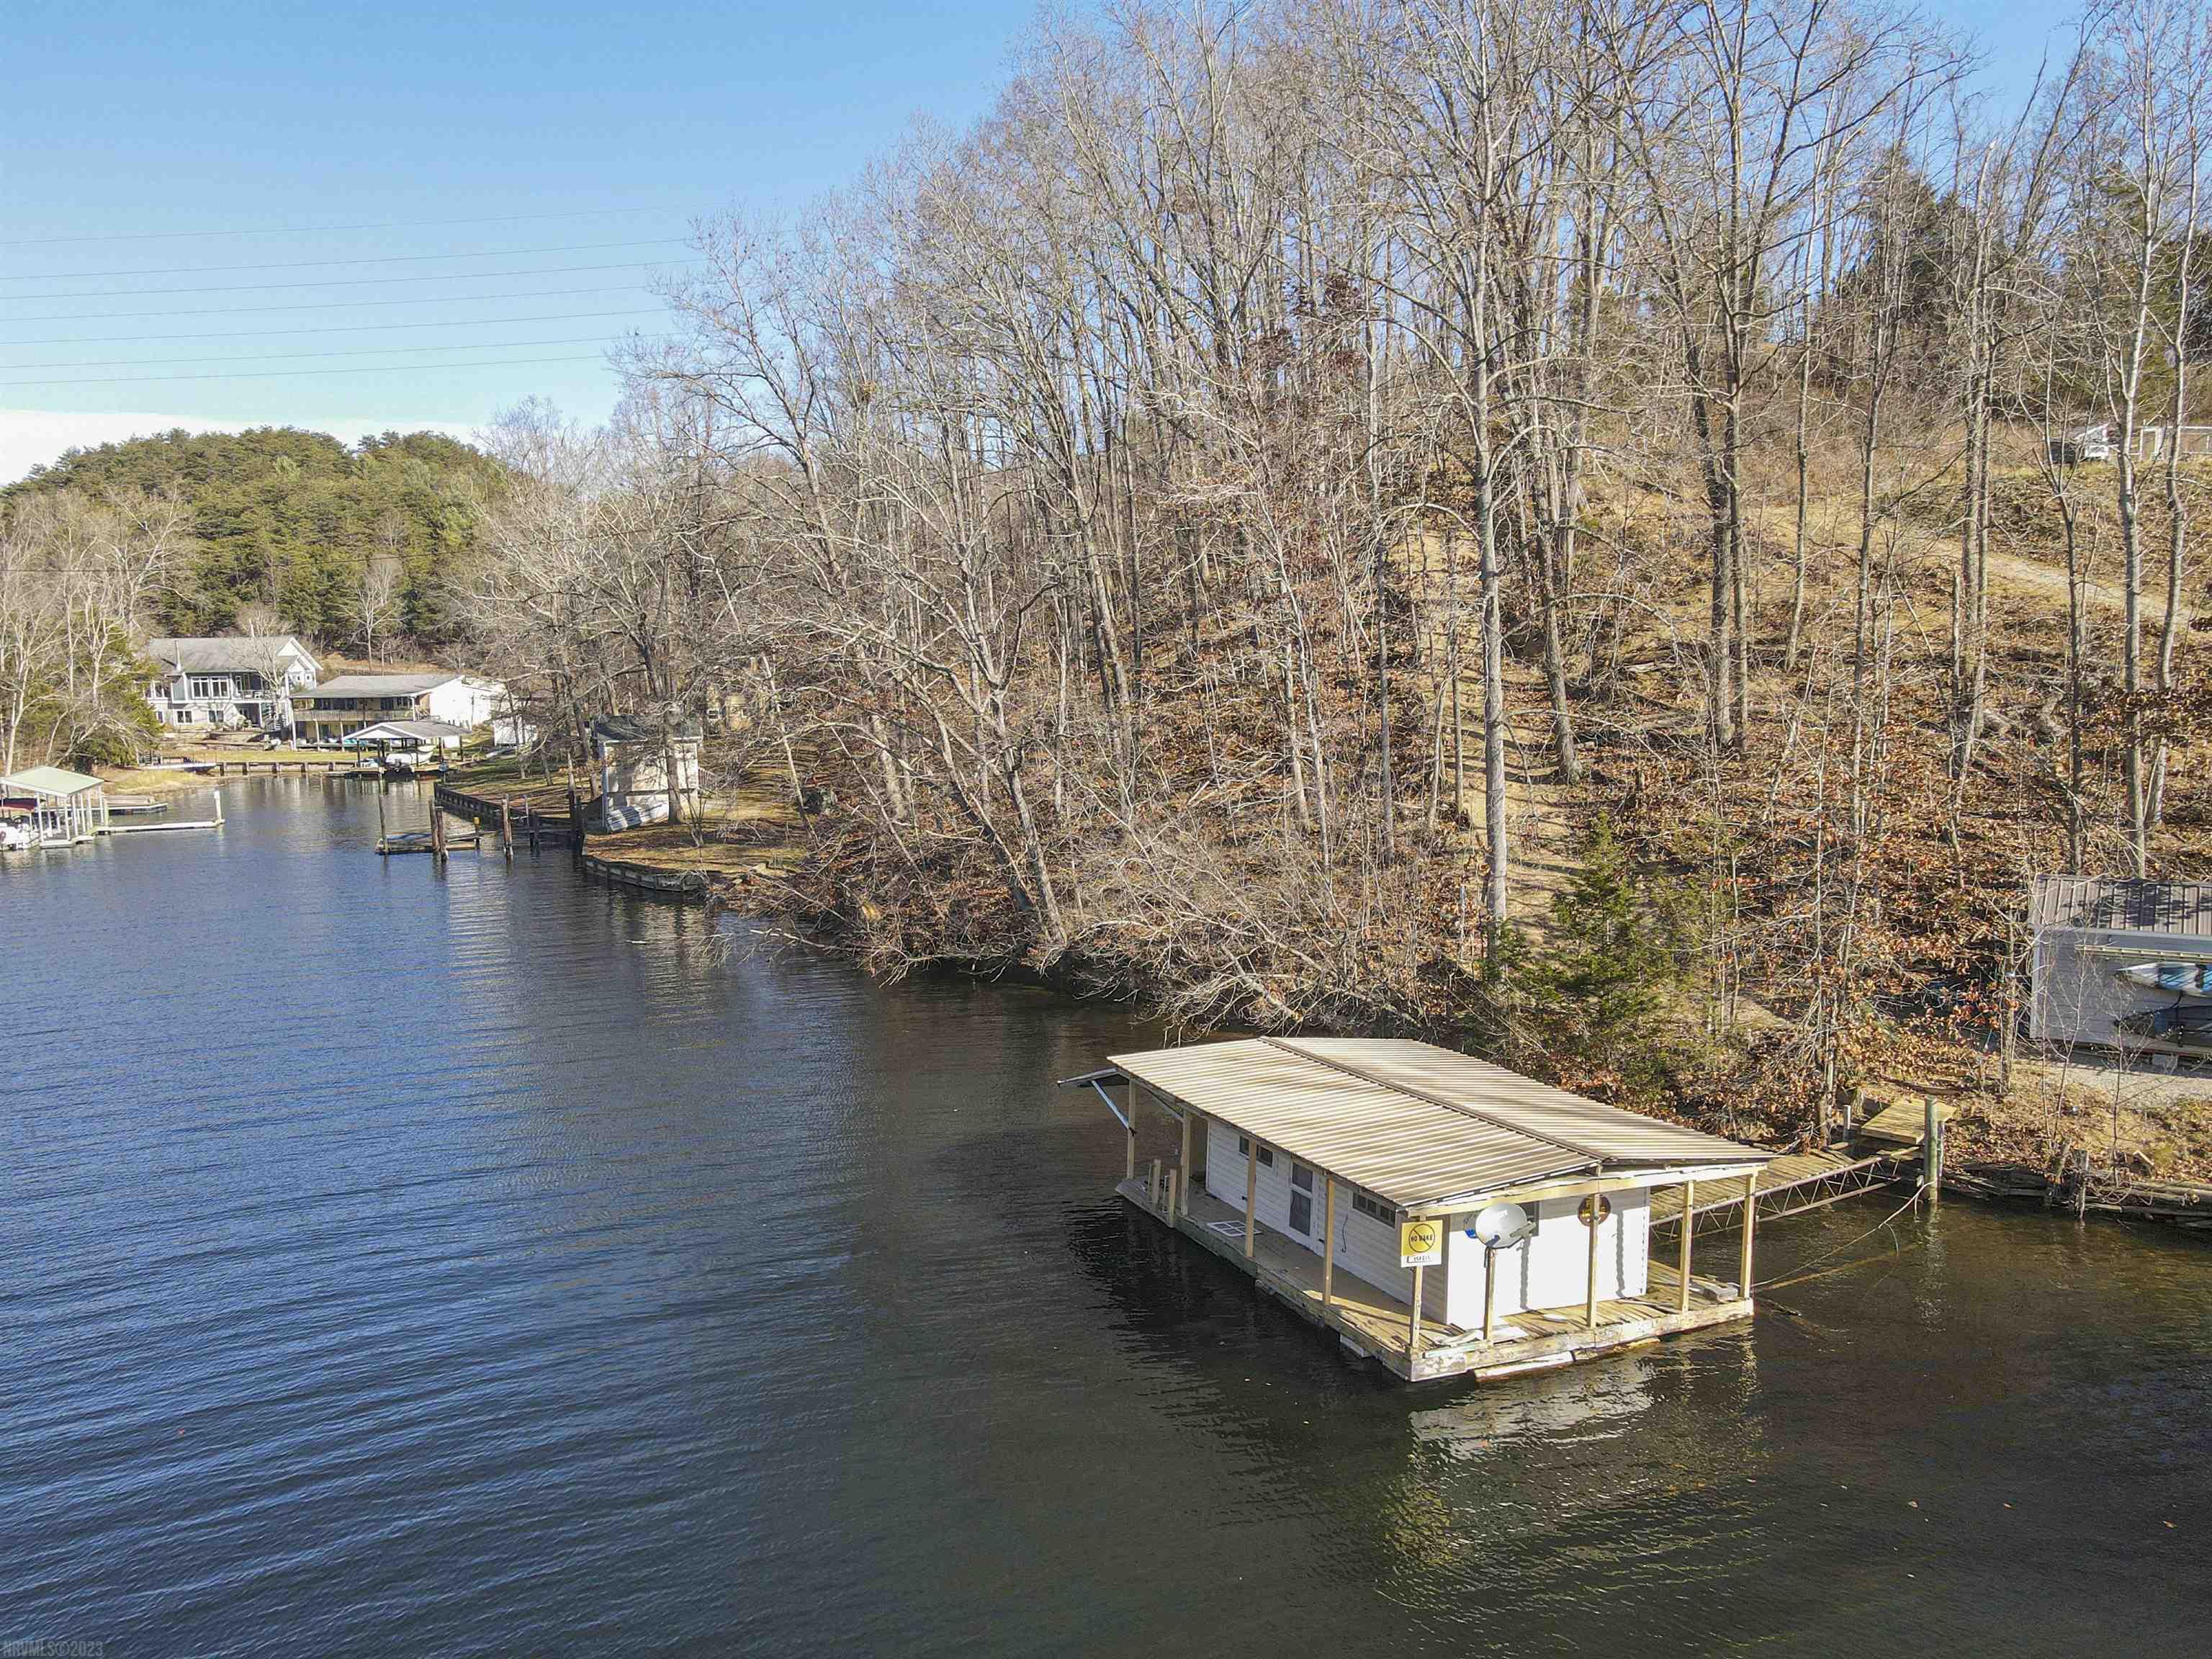 Amazing views from this Claytor Lake waterfront lot! Only minutes from I-81, this lake location is convenient and highly sought after. This secluded lot offers 35 feet of waterfront with deep water, deeded boat launch access just one lot over and views that will knock your socks off! County zoning allows for manufactured homes (buyer to verify) and there are no covenants, restrictions or HOA. This type of lot on Claytor Lake is hard to find. Newer survey on file with a permit for a conventional, 3 bedroom gravity septic system. Come take a look...you won't want to leave!